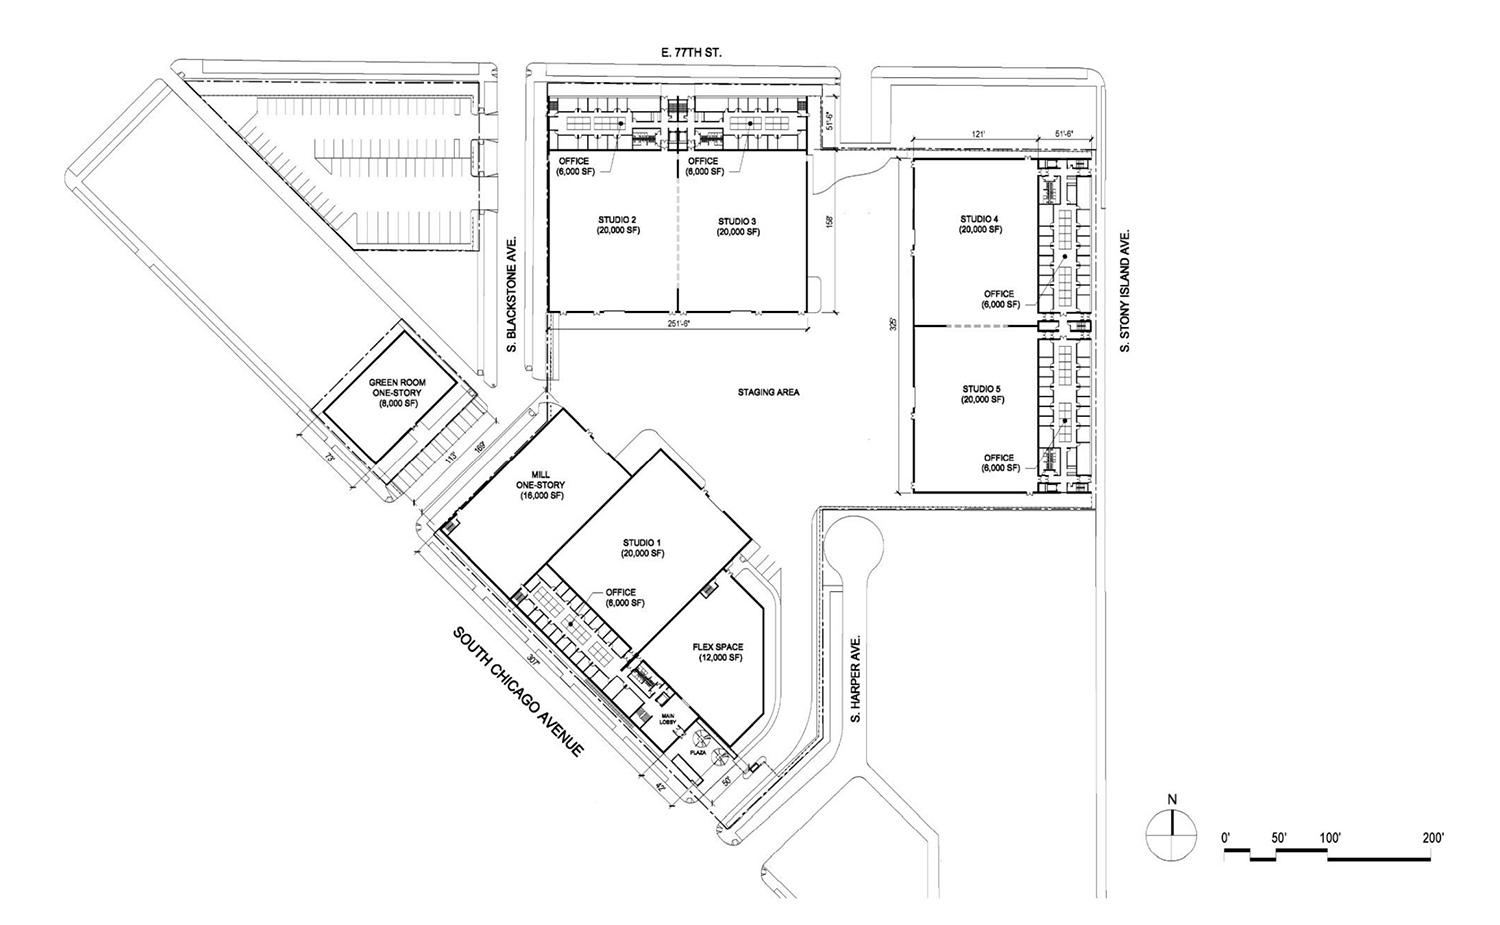 Site Plan for Regal Mile Film Studios Drawing by Bauer Latoza Studio